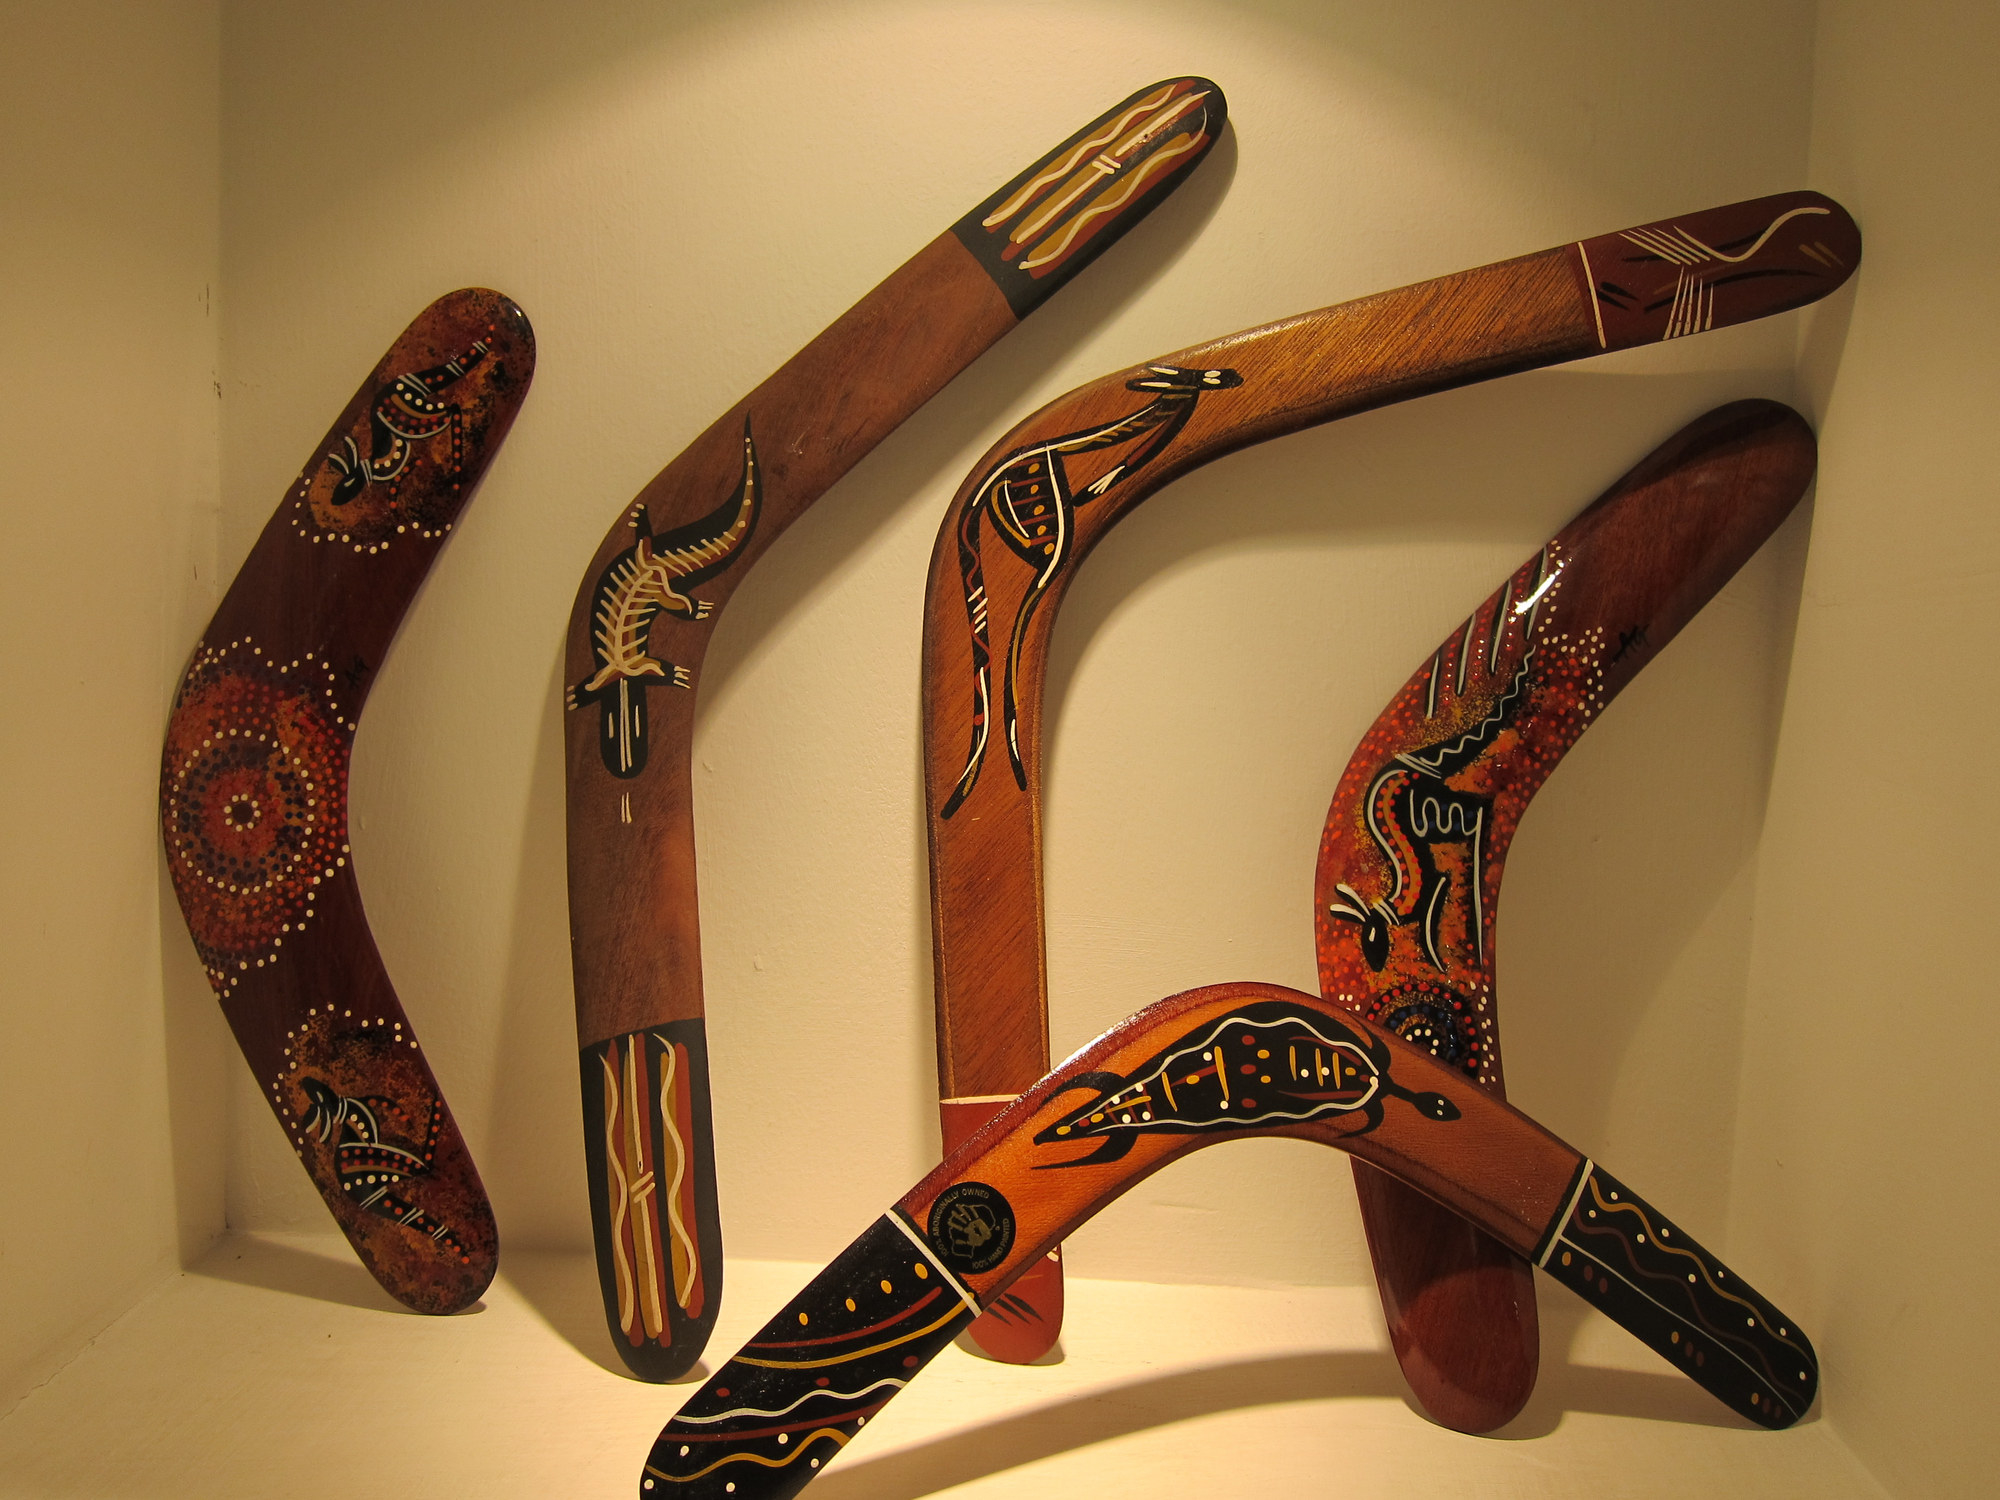 A display of five wooden boomerangs with artwork